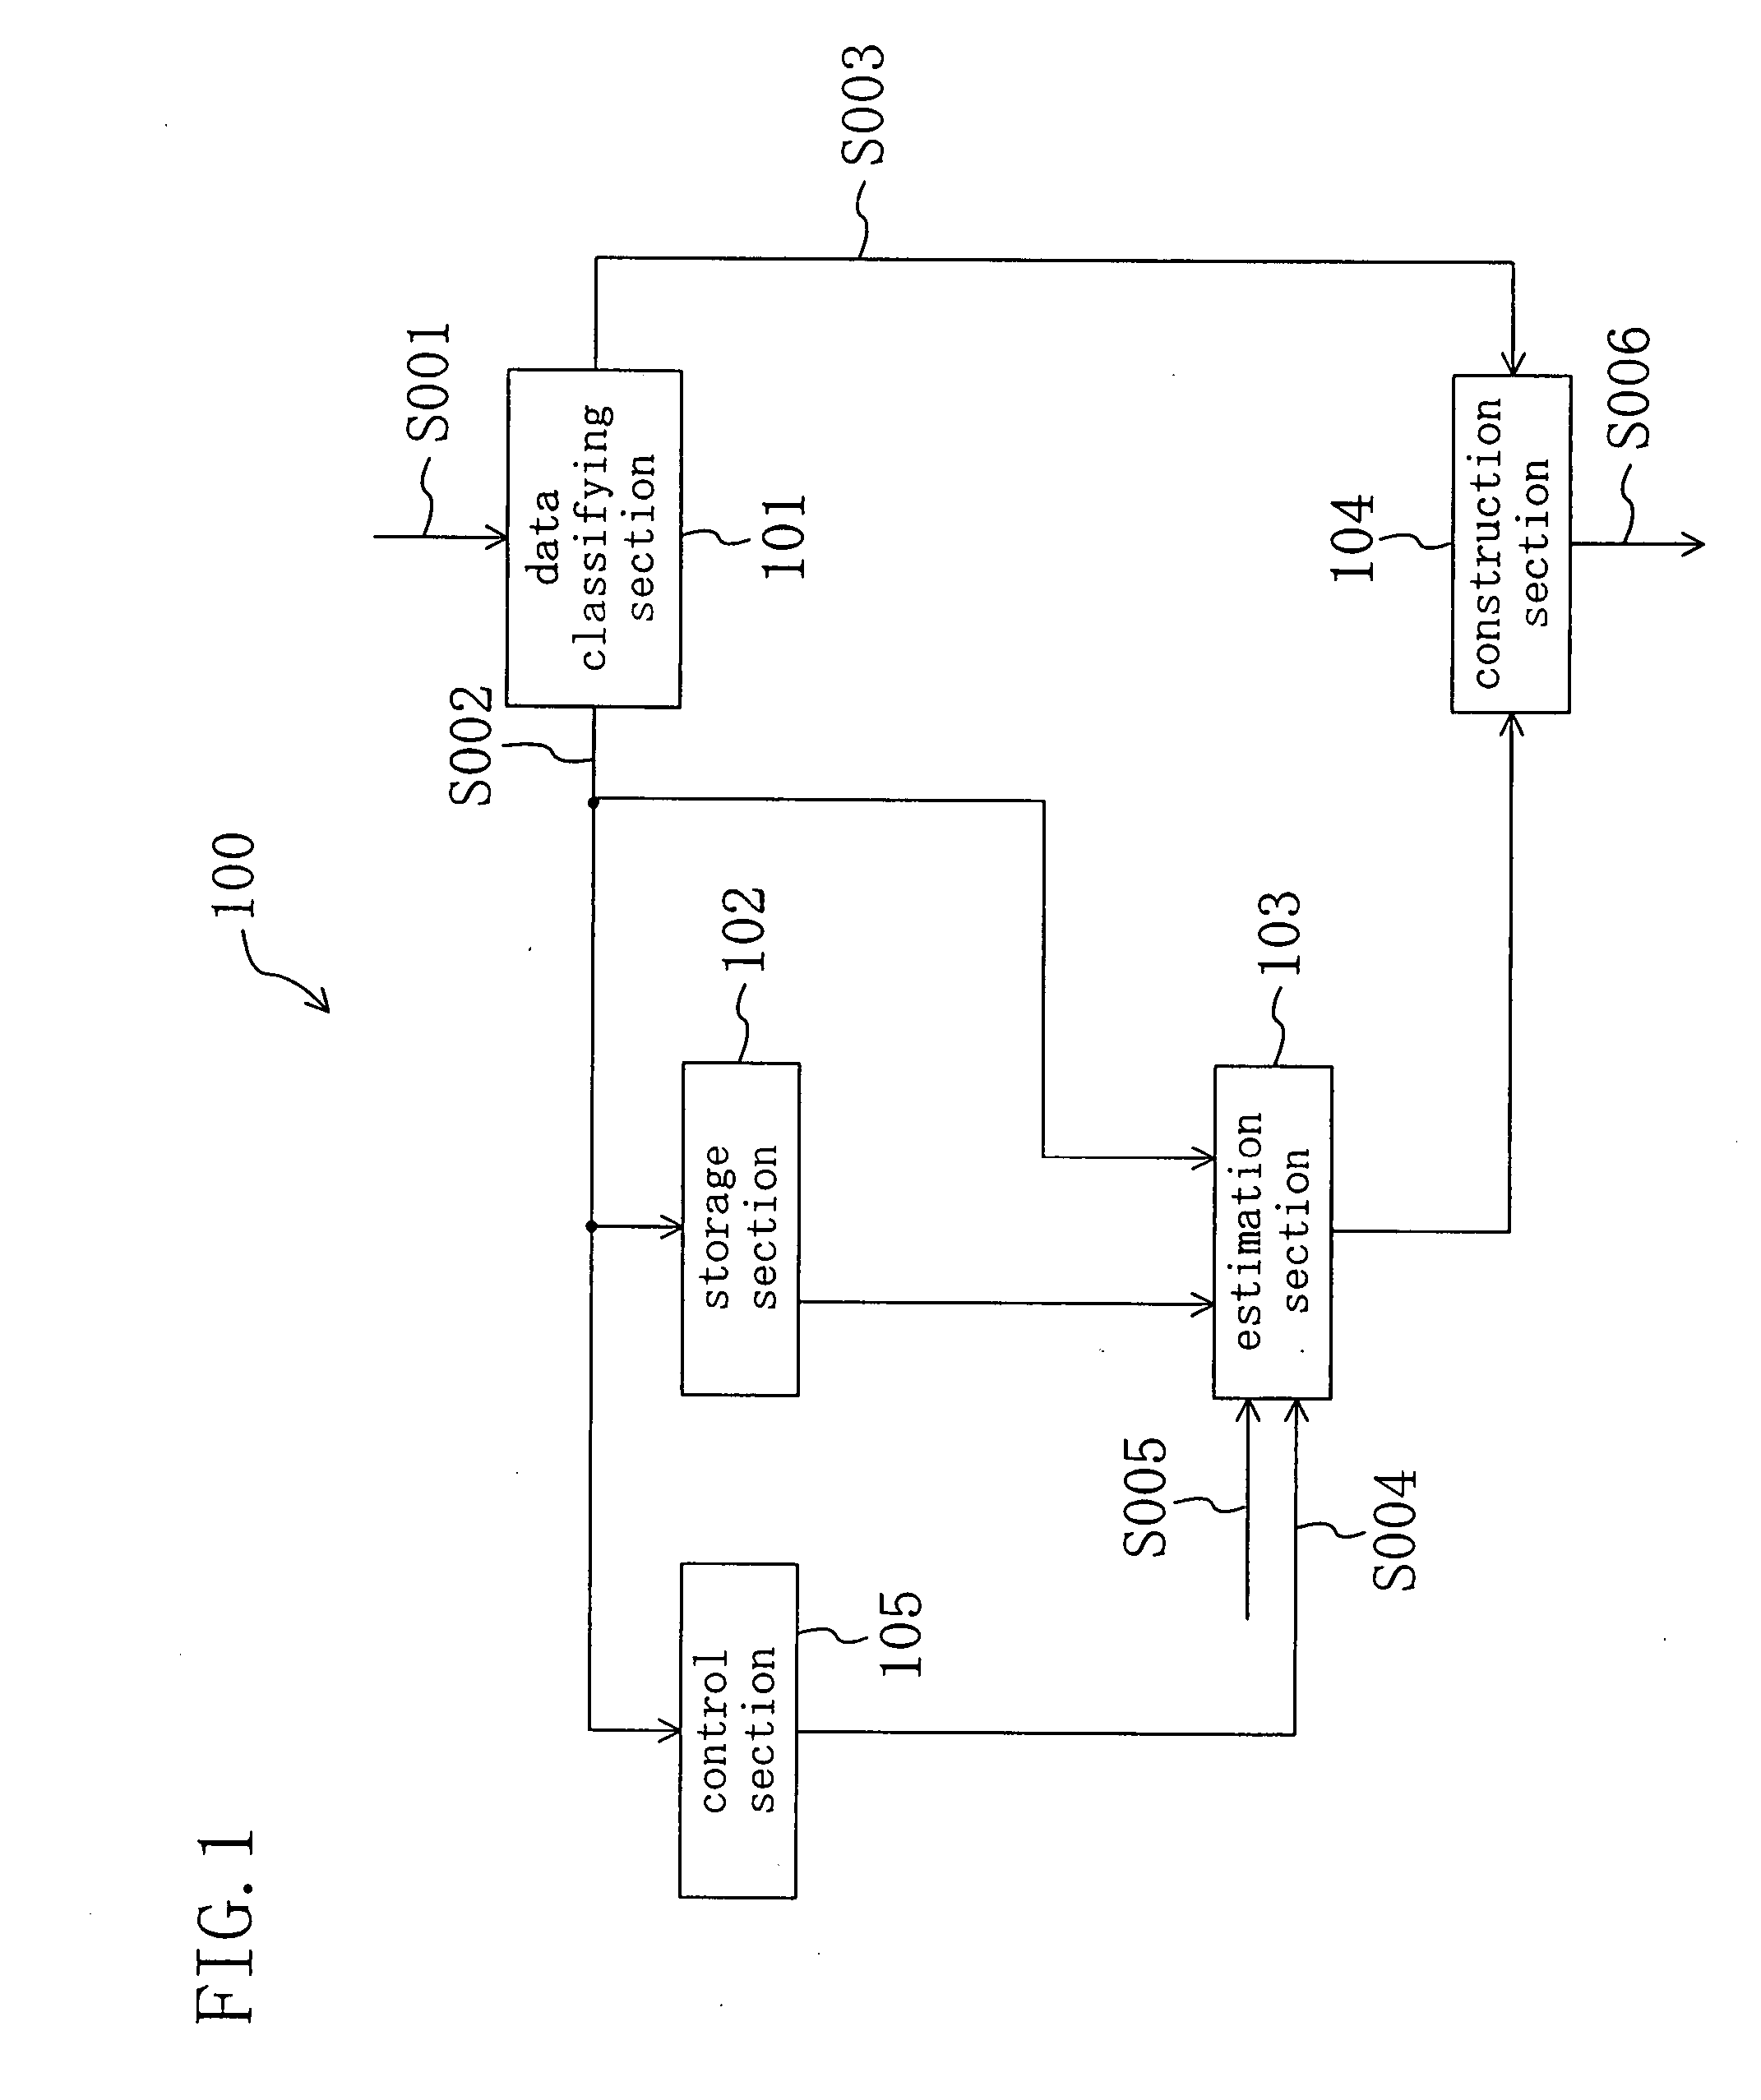 Decoder, signal processing system, and decoding method